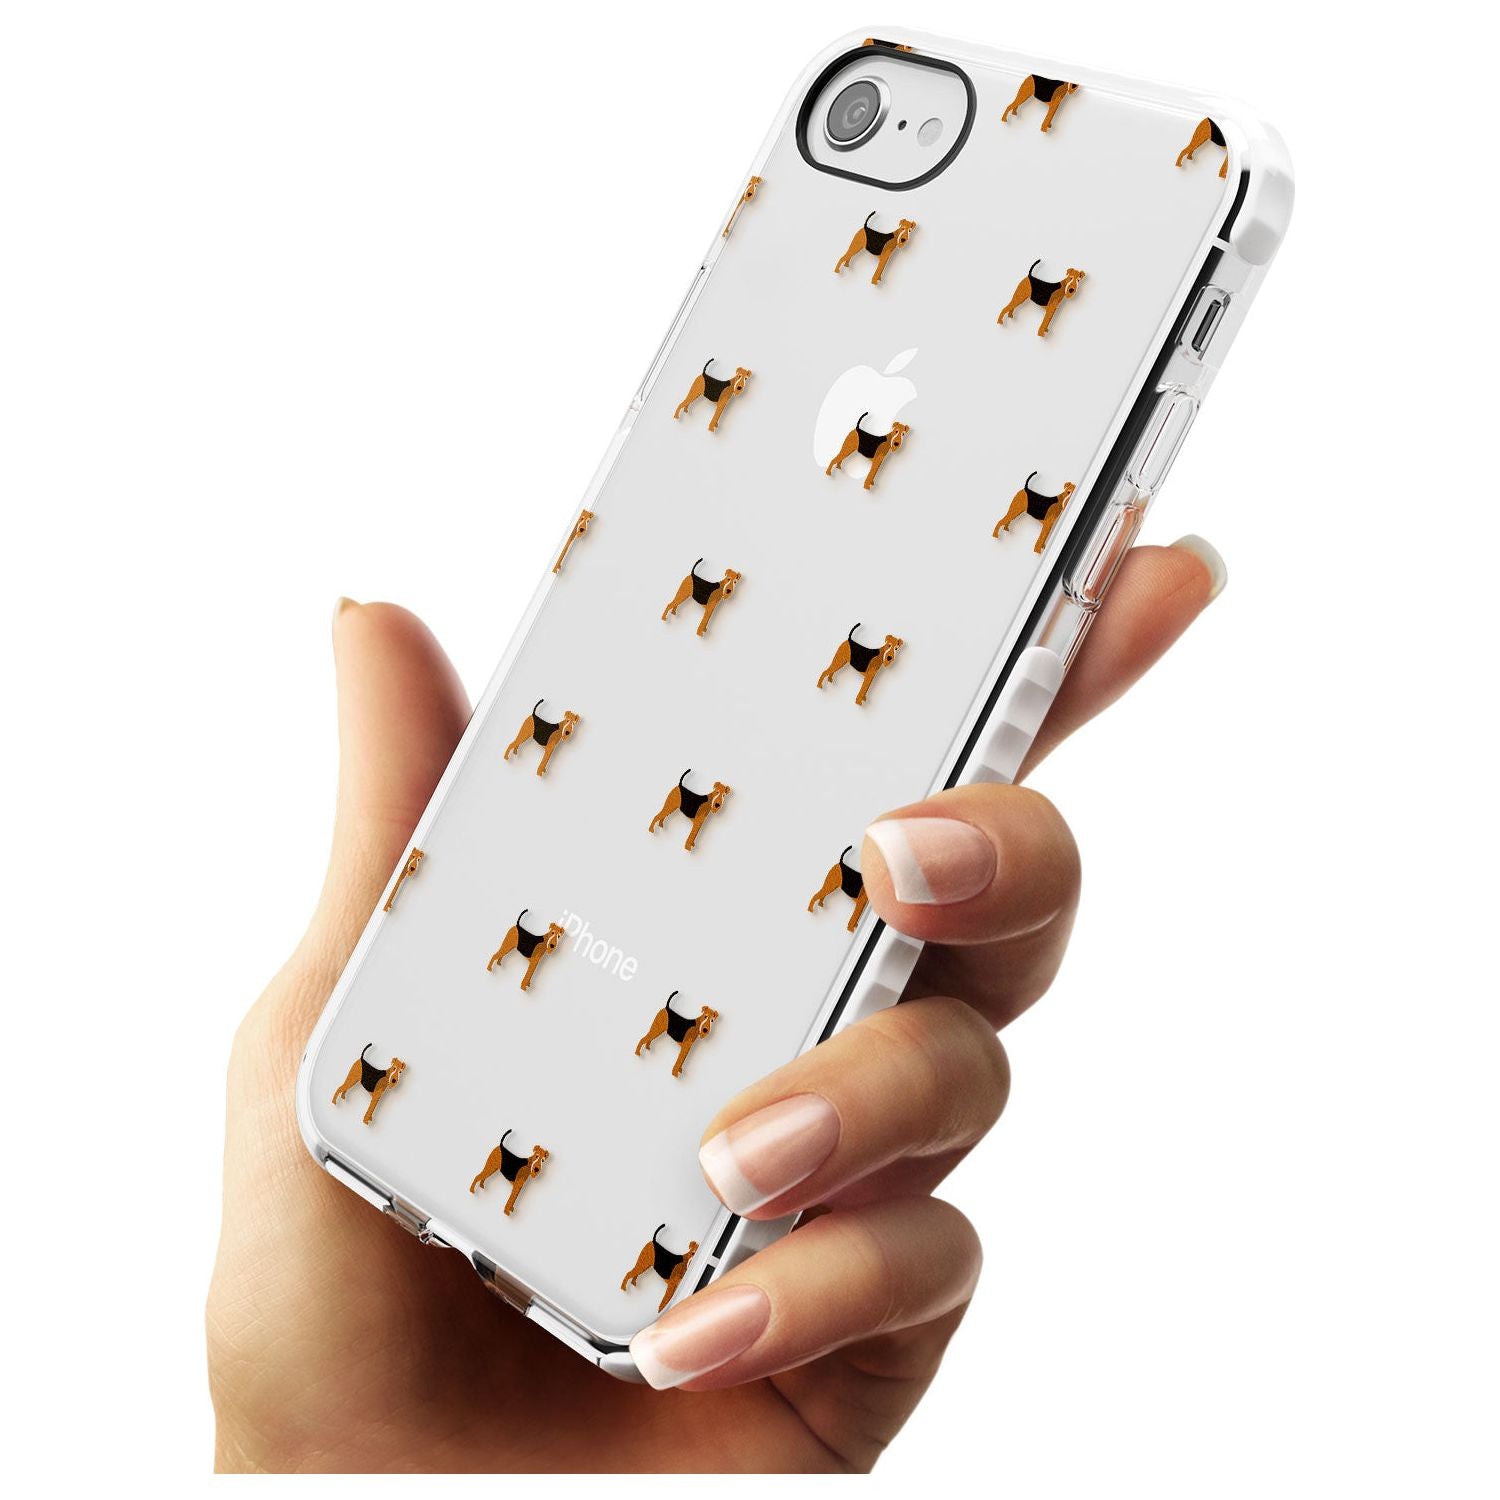 Airedale Terrier Dog Pattern Clear Impact Phone Case for iPhone SE 8 7 Plus